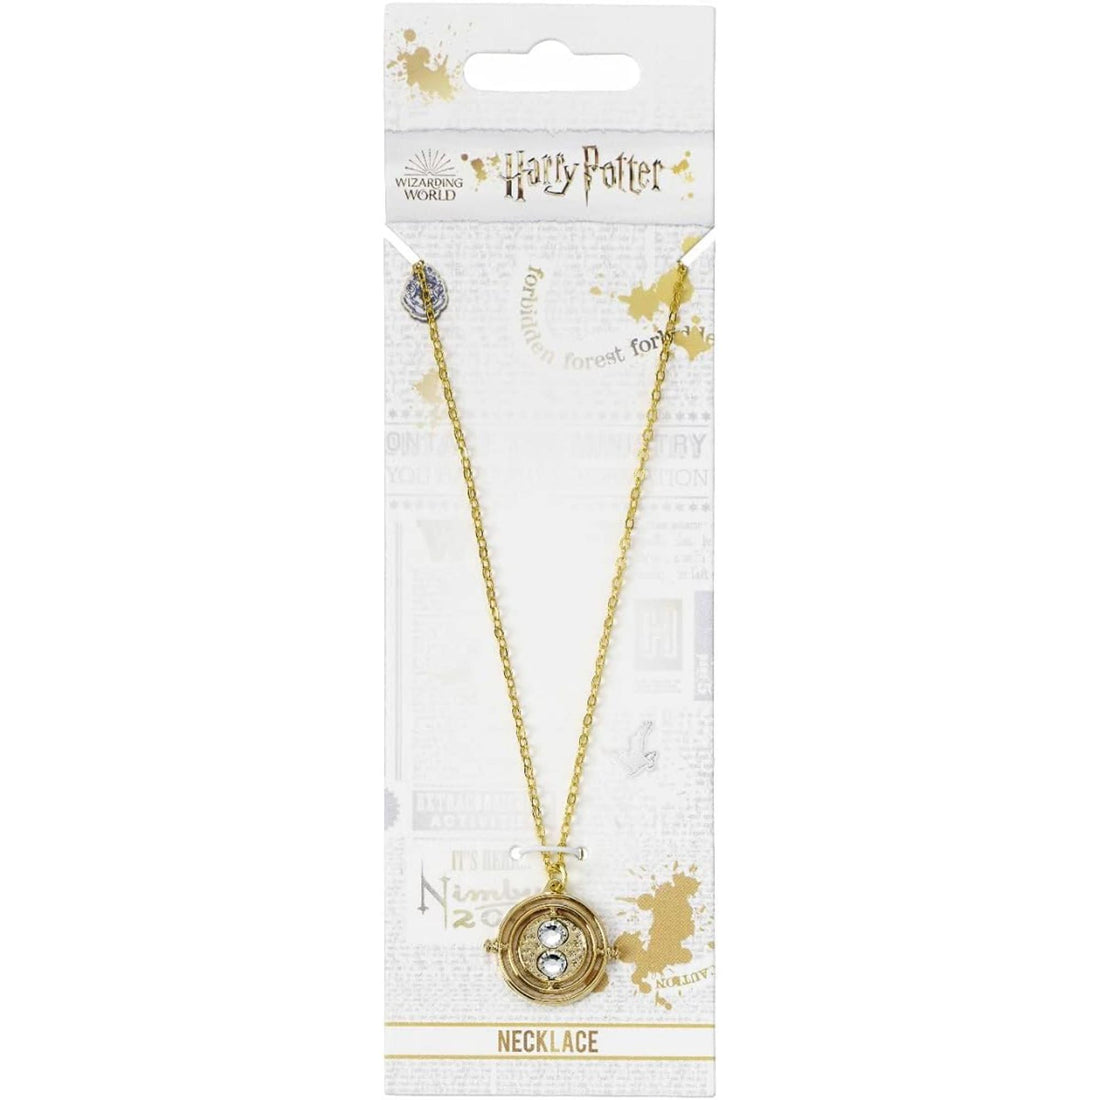 Necklace with Fixed Time Turner 20mm